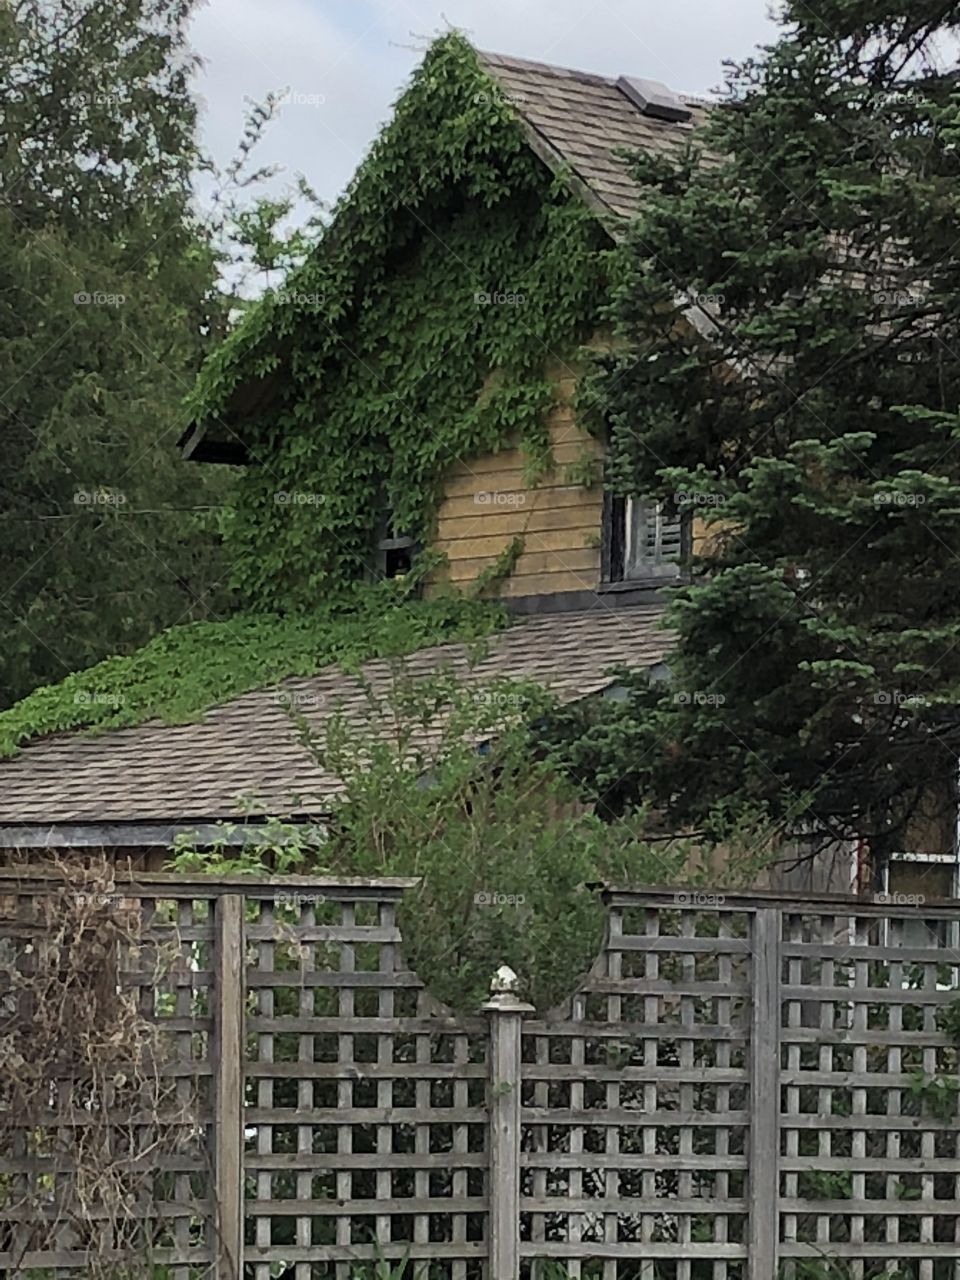 House covered in green vines